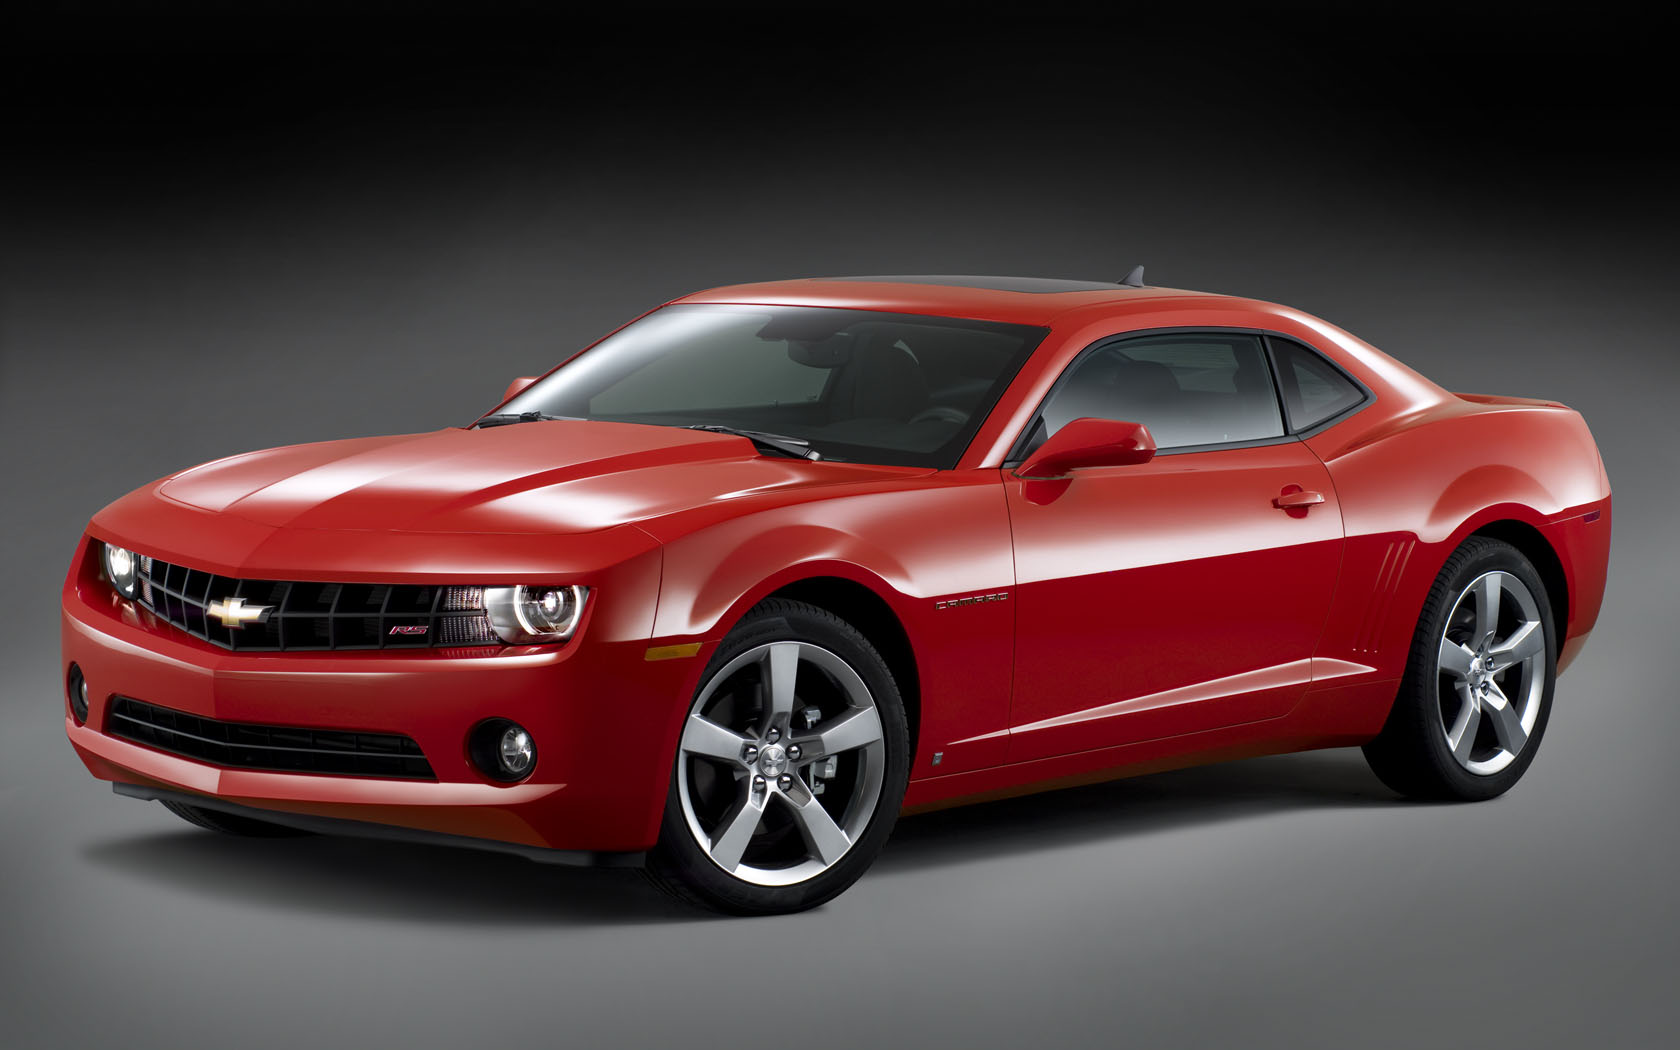 Red Chevy Camaro Wallpaper 4128 Hd Wallpapers in Cars   Imagescicom